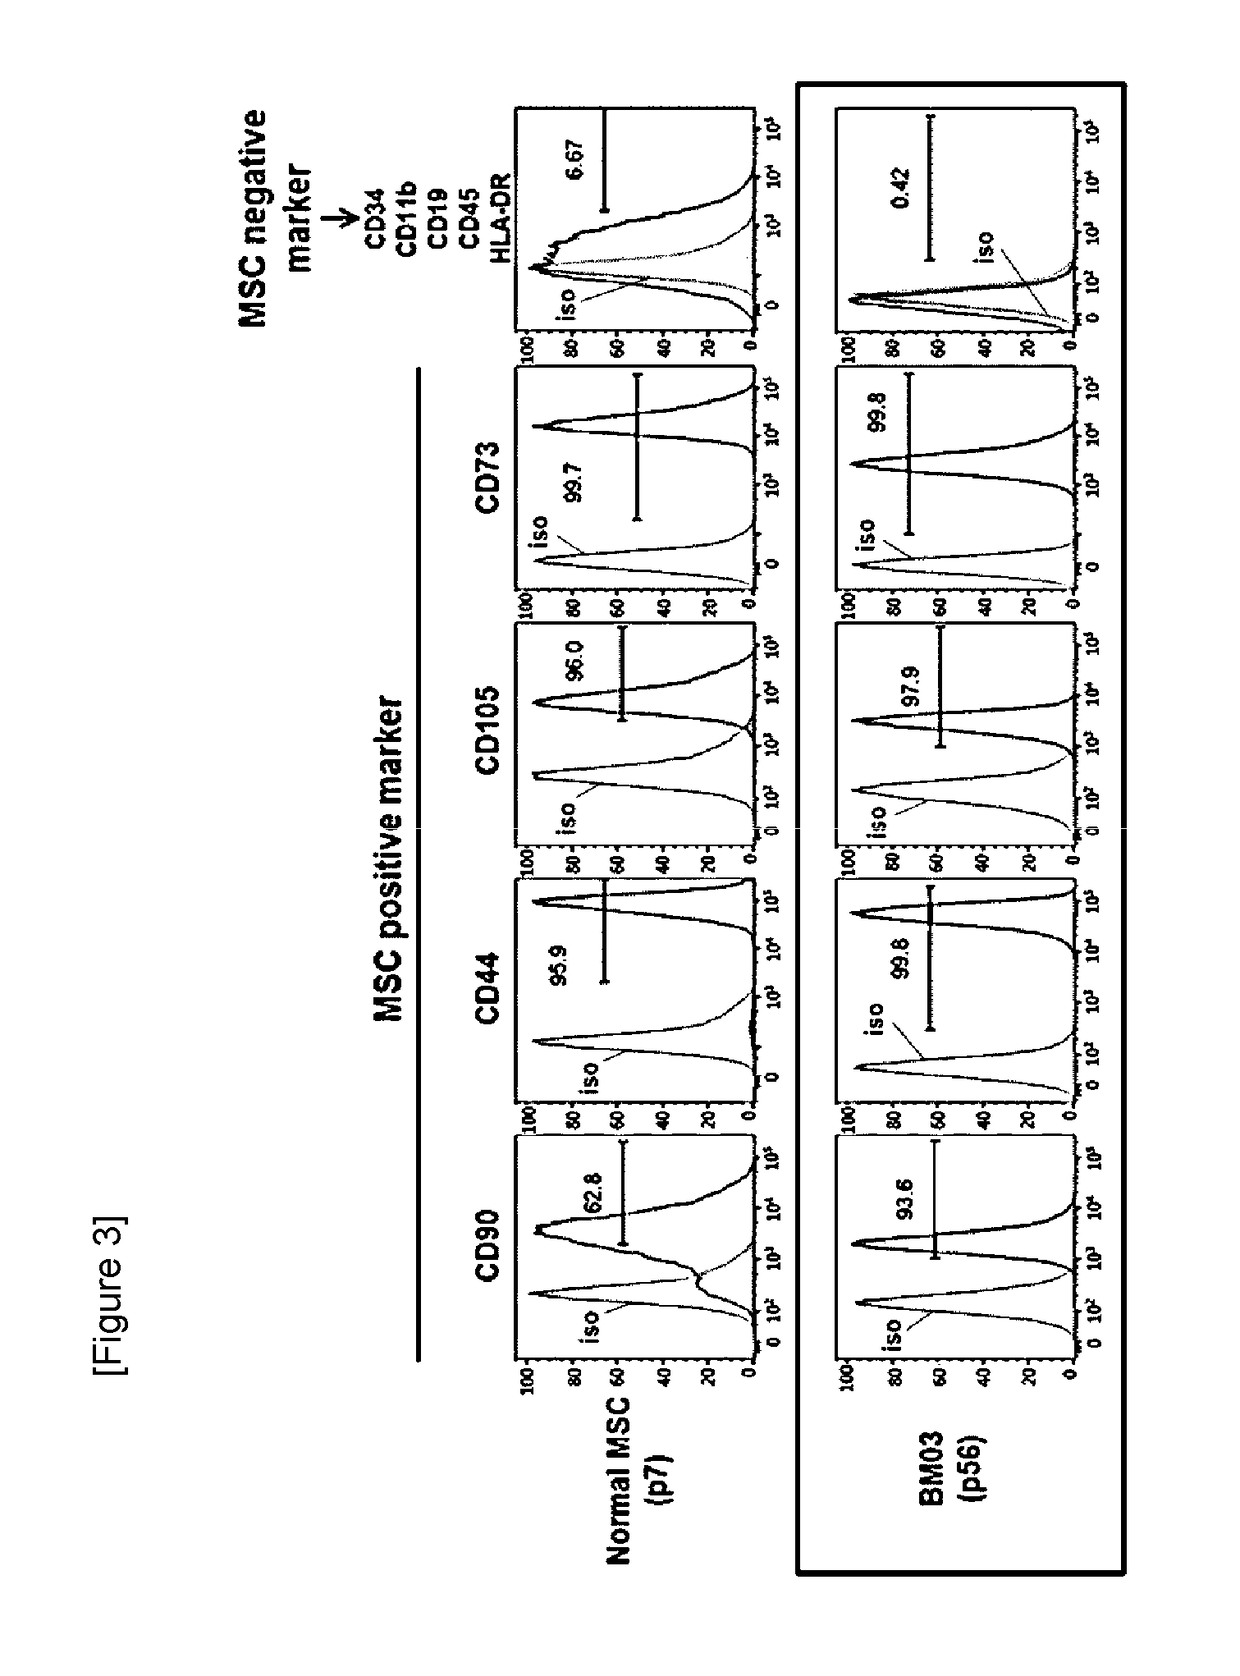 Mesenchymal stem cell expressing trail and cd, and use thereof